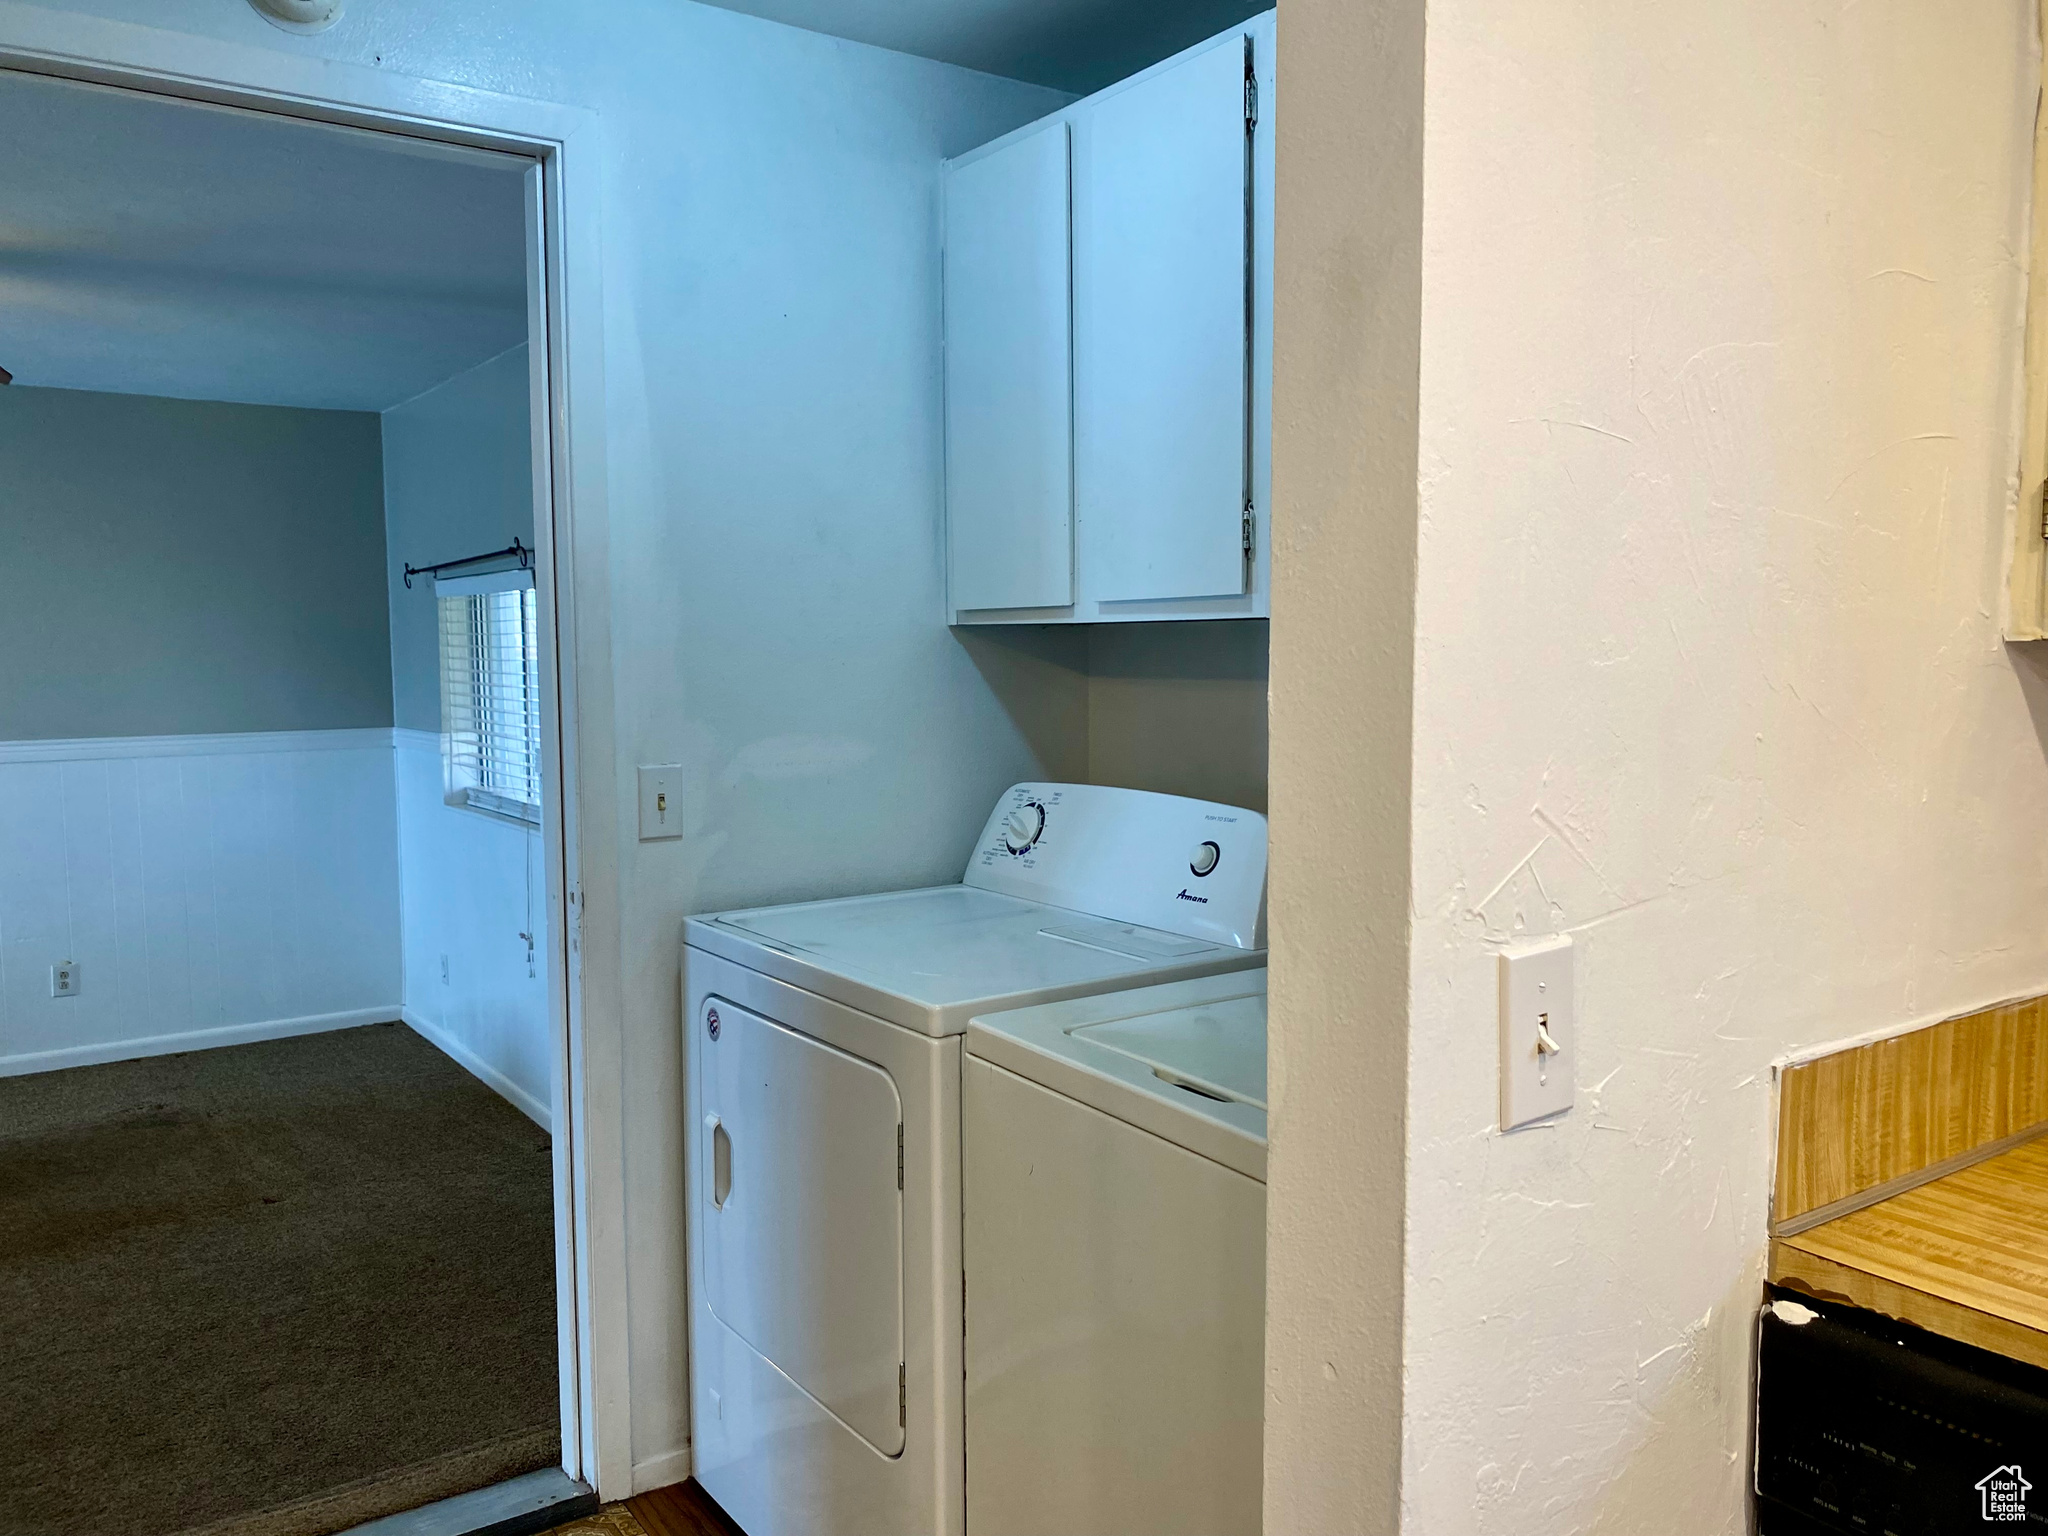 Clothes washing area with separate washer and dryer, dark carpet, and cabinets